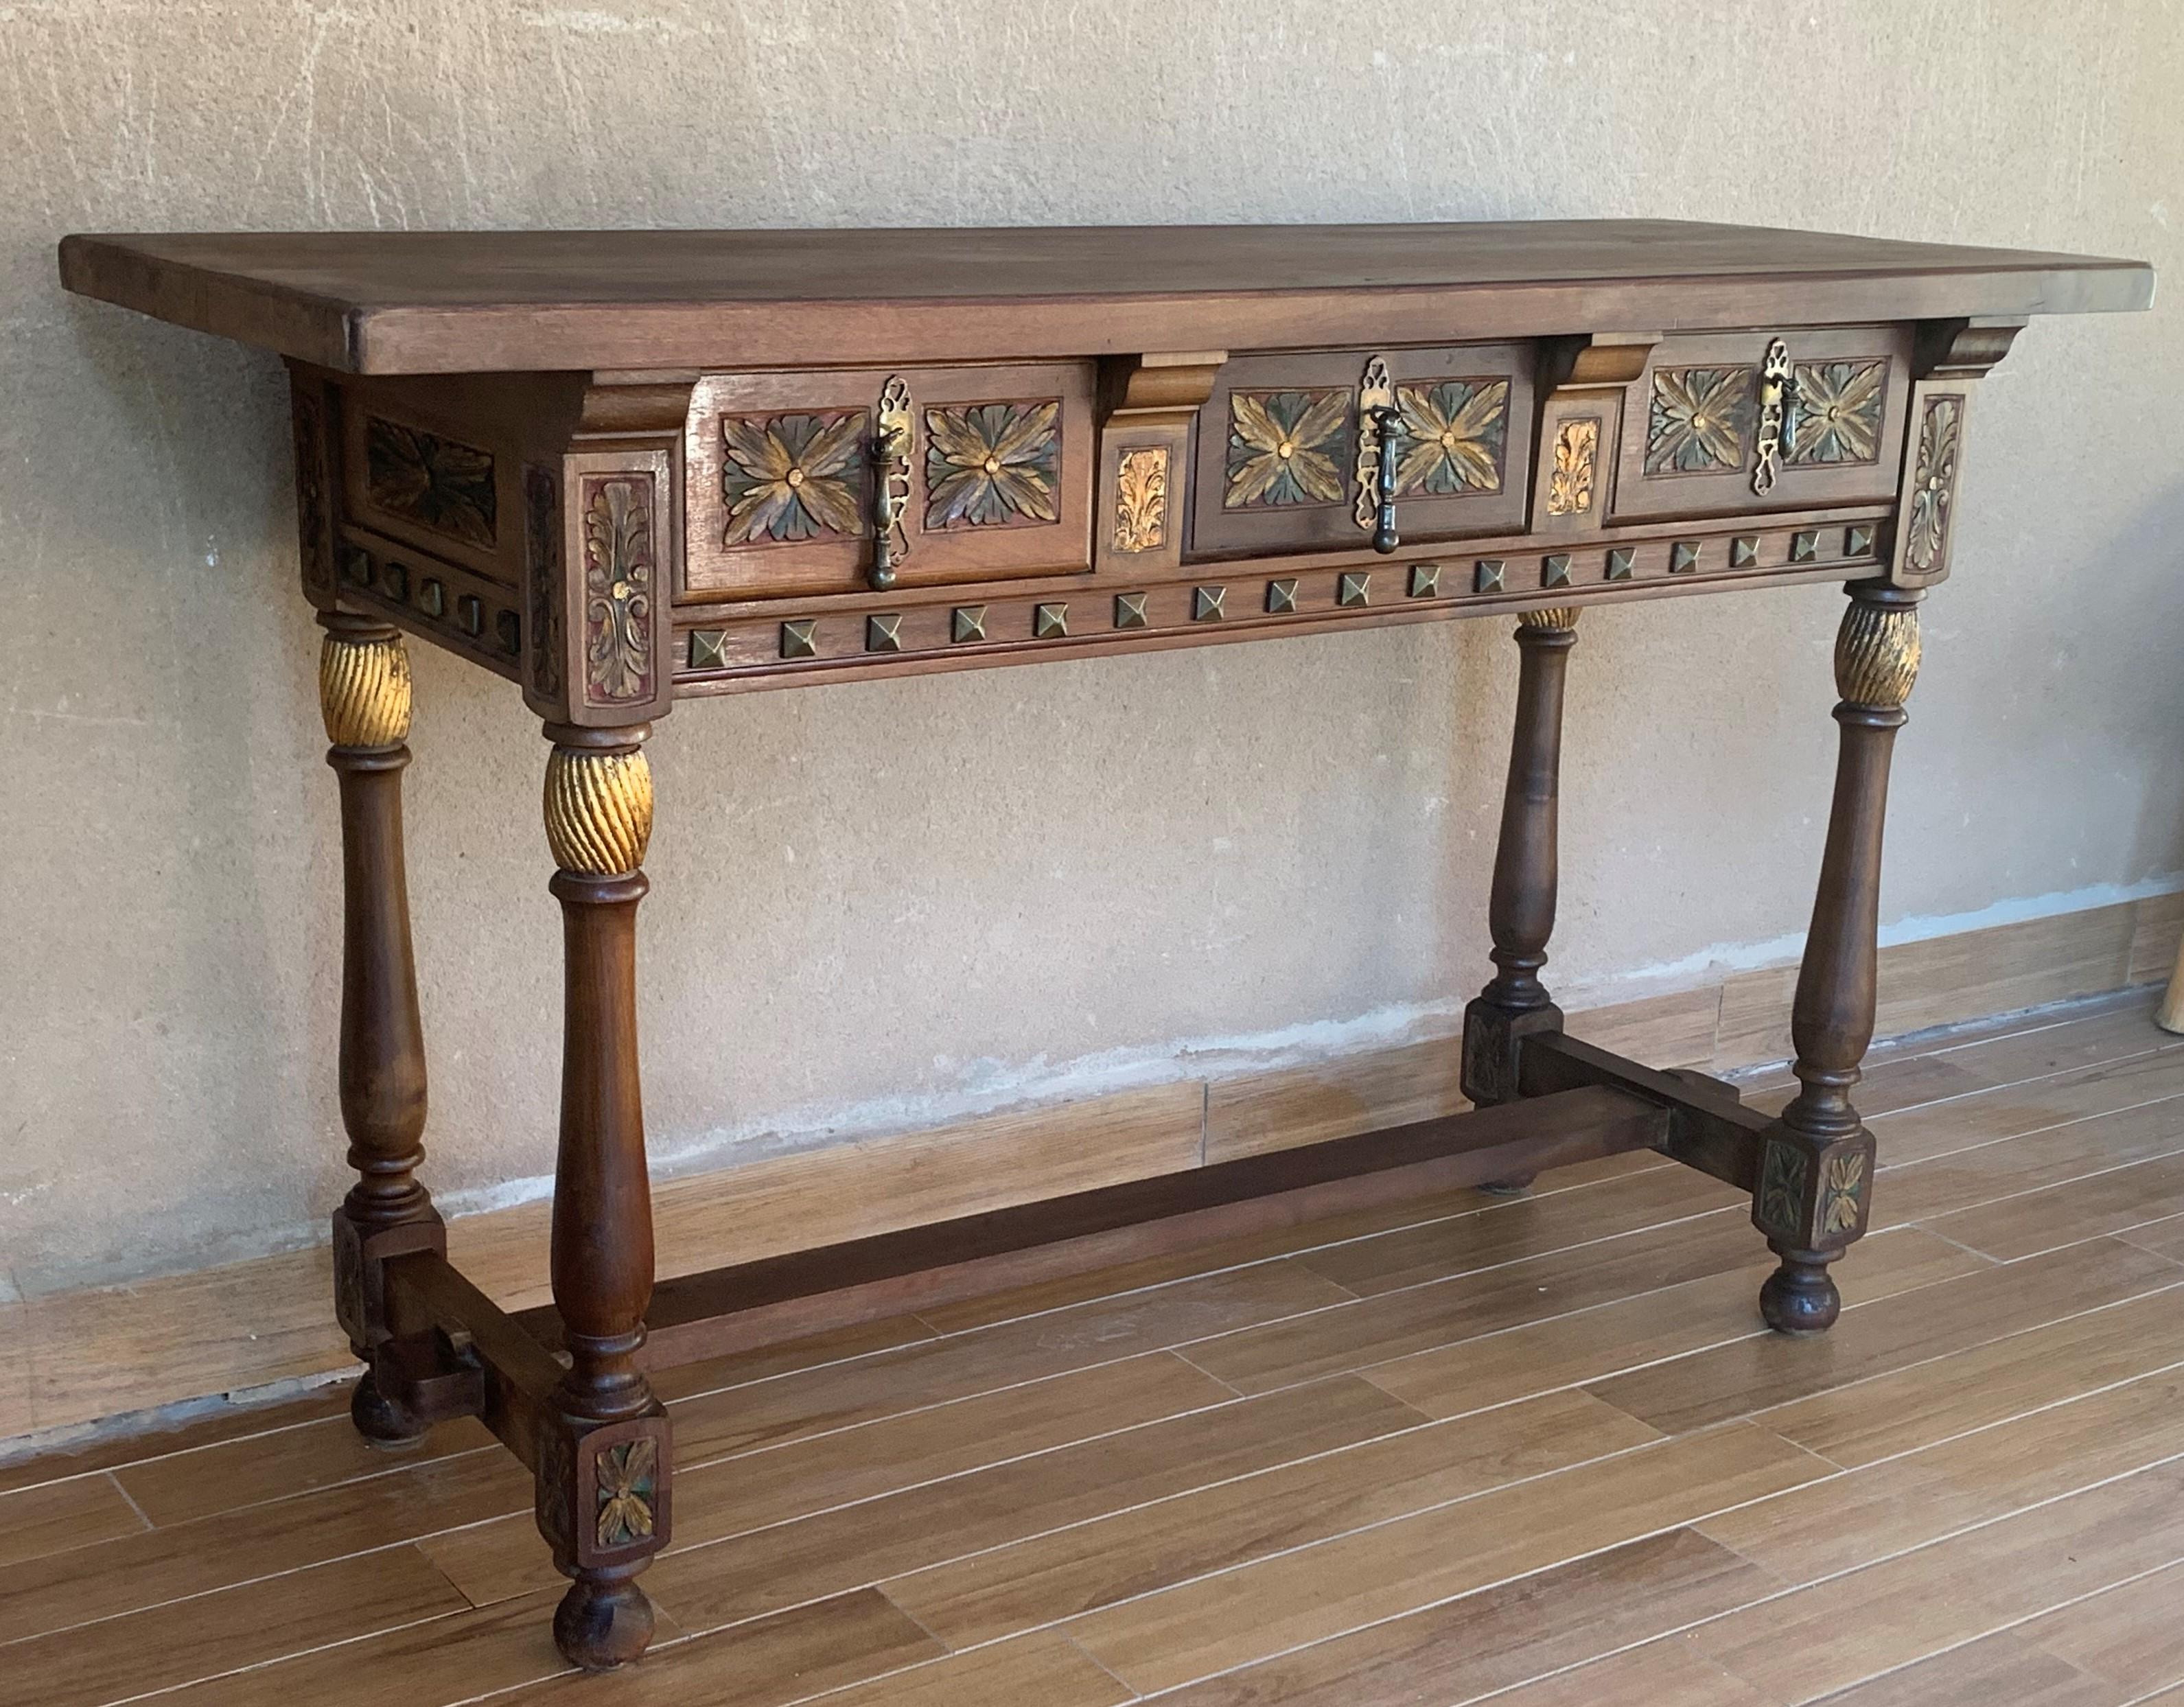 Baroque Early 19th Century Carved Walnut Wood Catalan Spanish Console Table